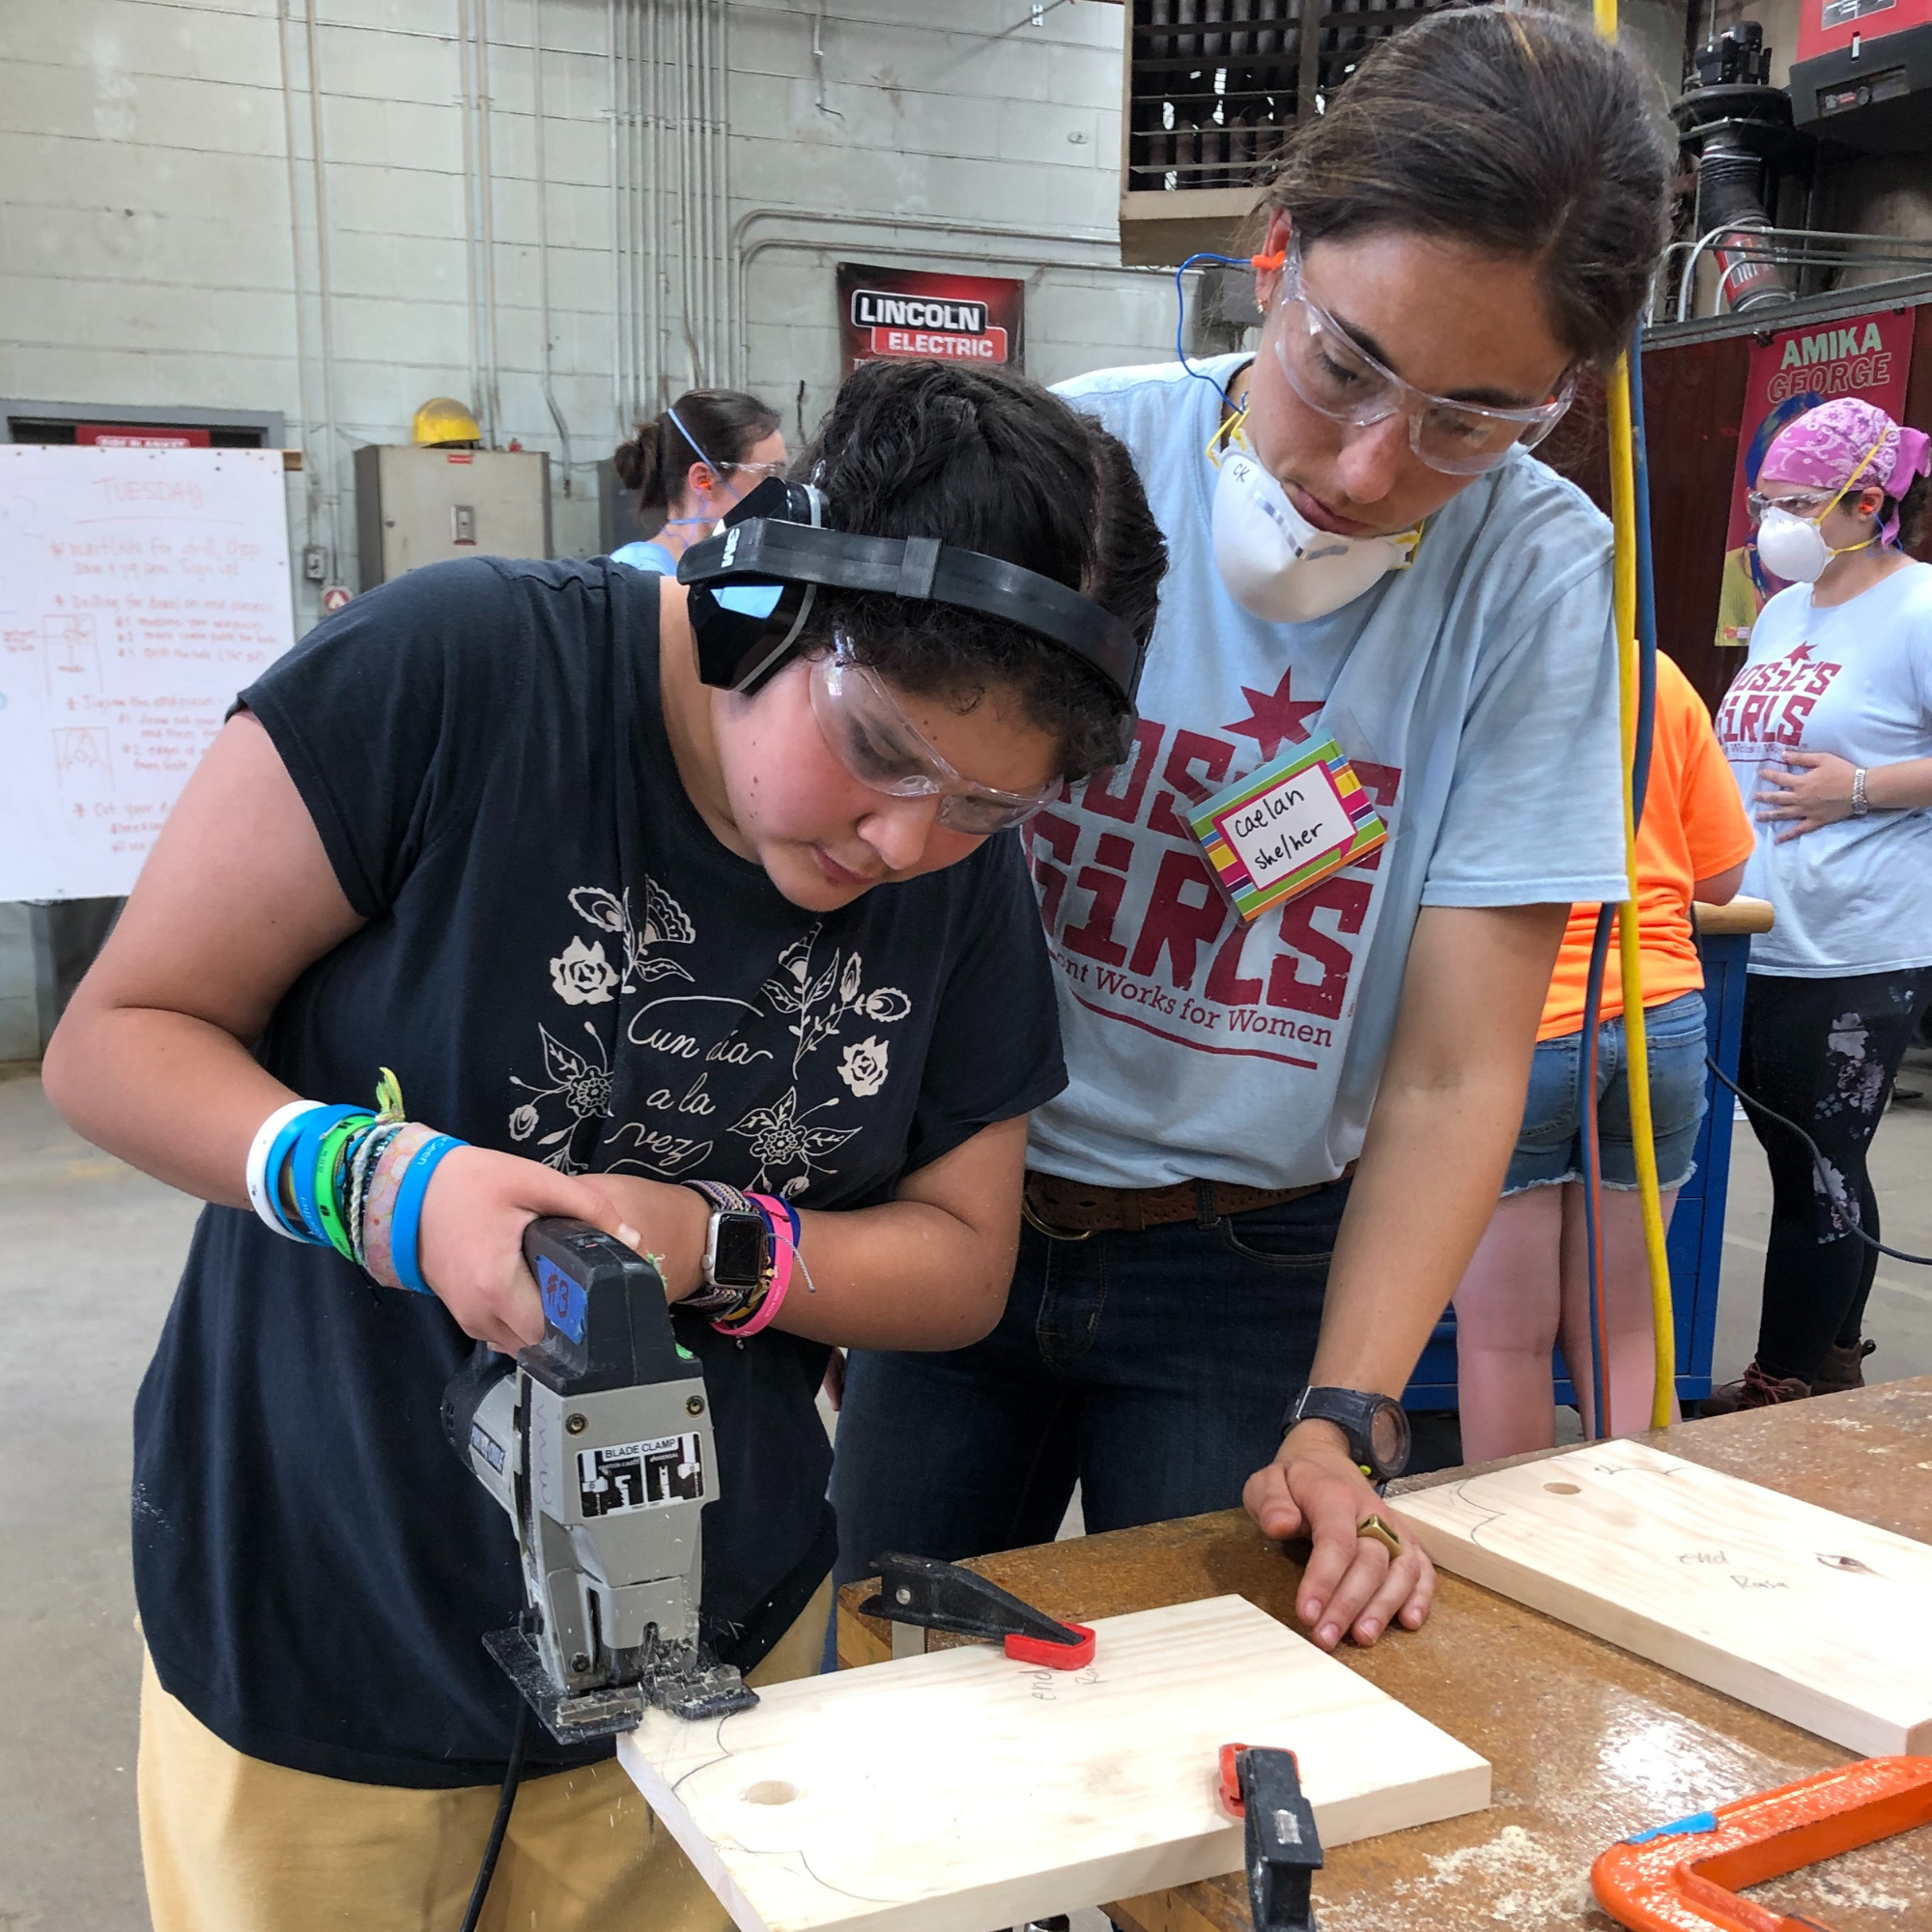 Camper uses a power tool to cute wood at Rosie's Girls Summer Camp